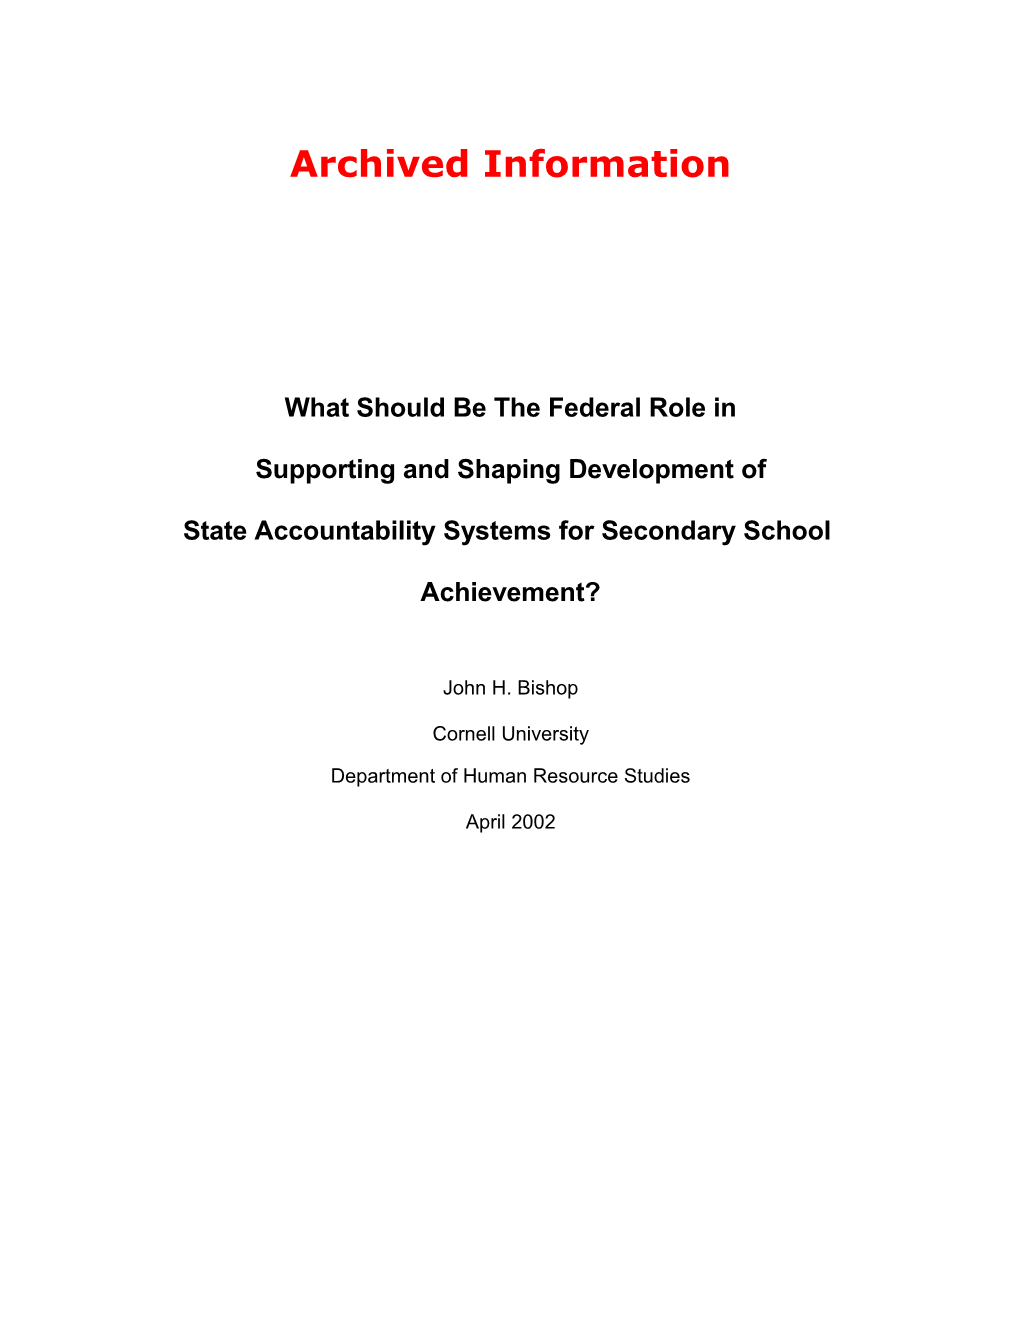 Archived: What Should Be the Federal Role in Supporting and Shaping Development of State